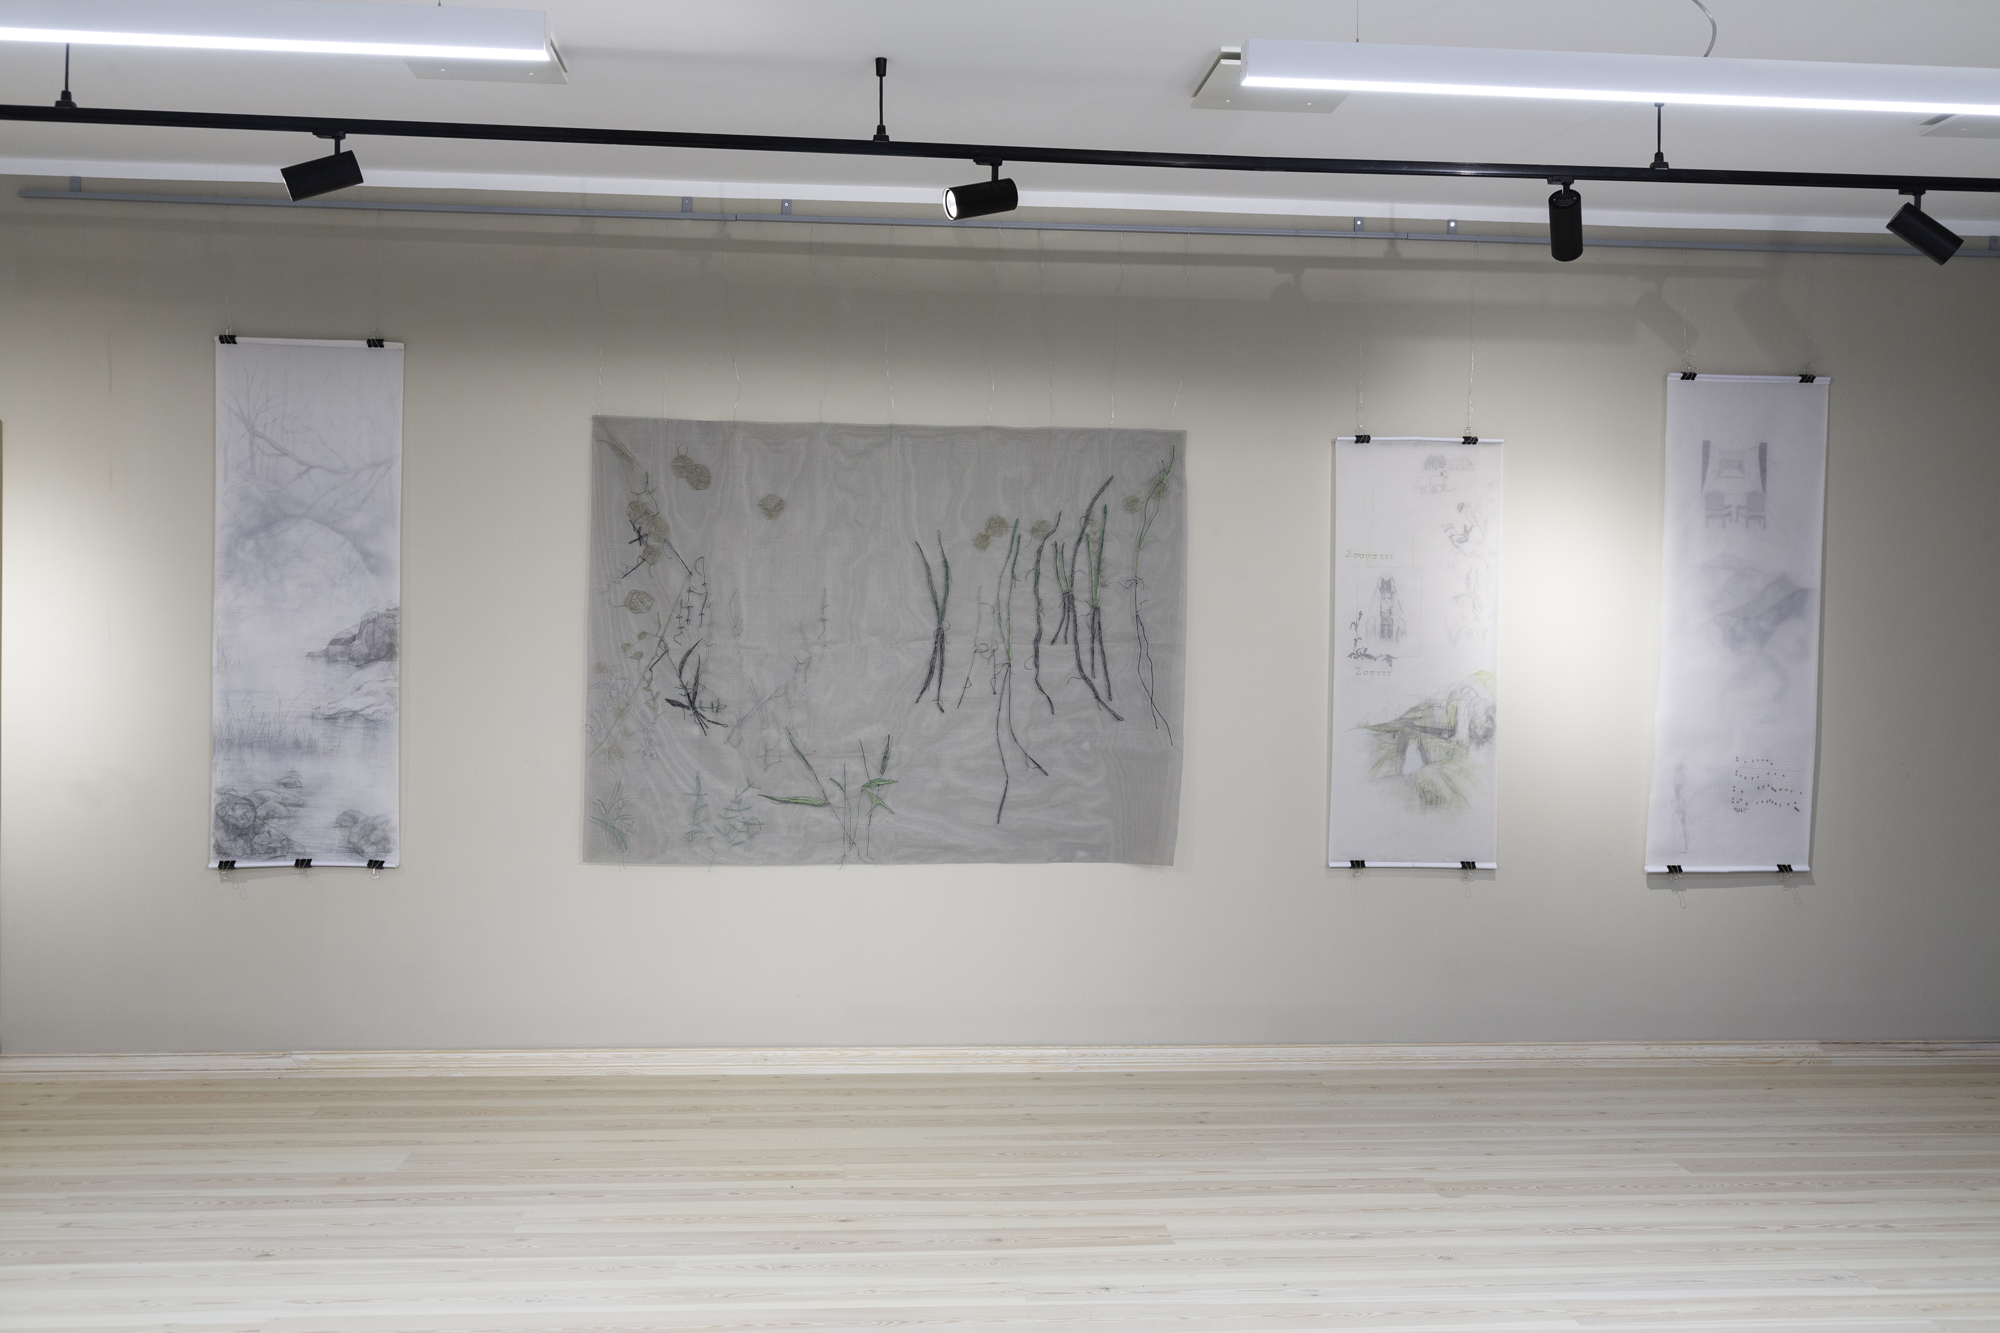 Exhibition “The ignored Poetry of Slowness”